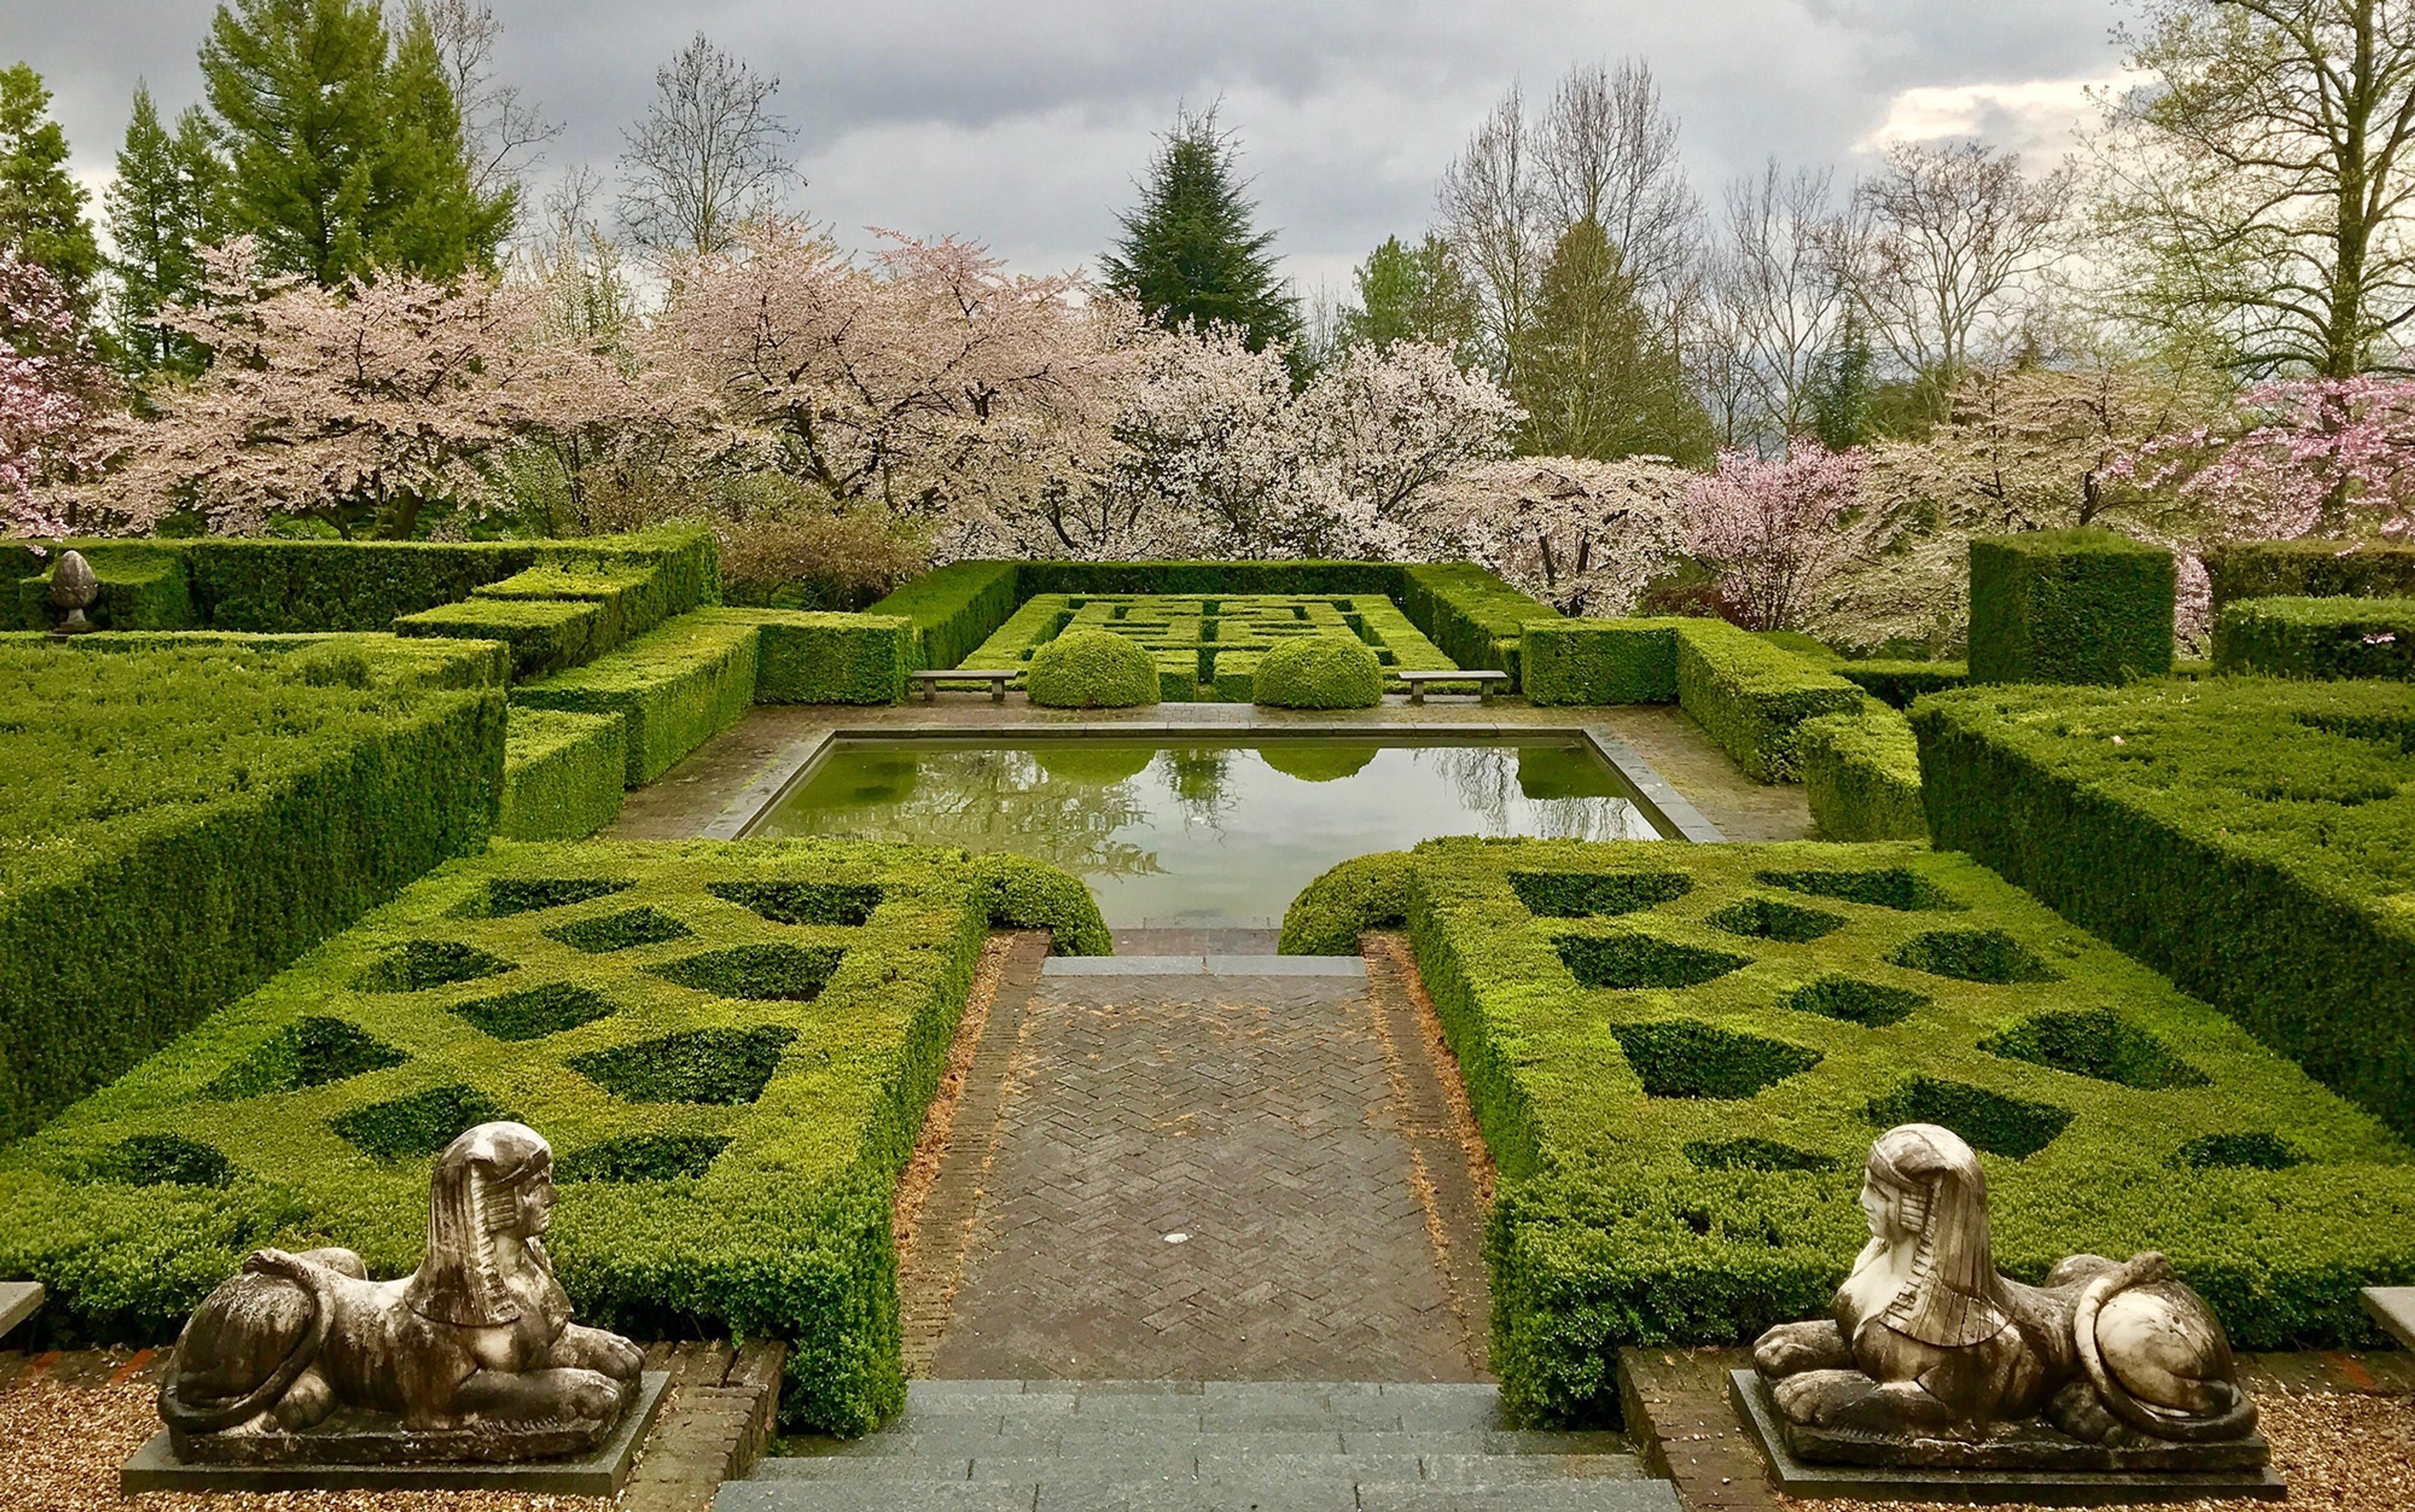 Two sphinx-like statues foreground an intricate formal garden of geometric hedges and a square pond. In the background are cherry trees in bloom